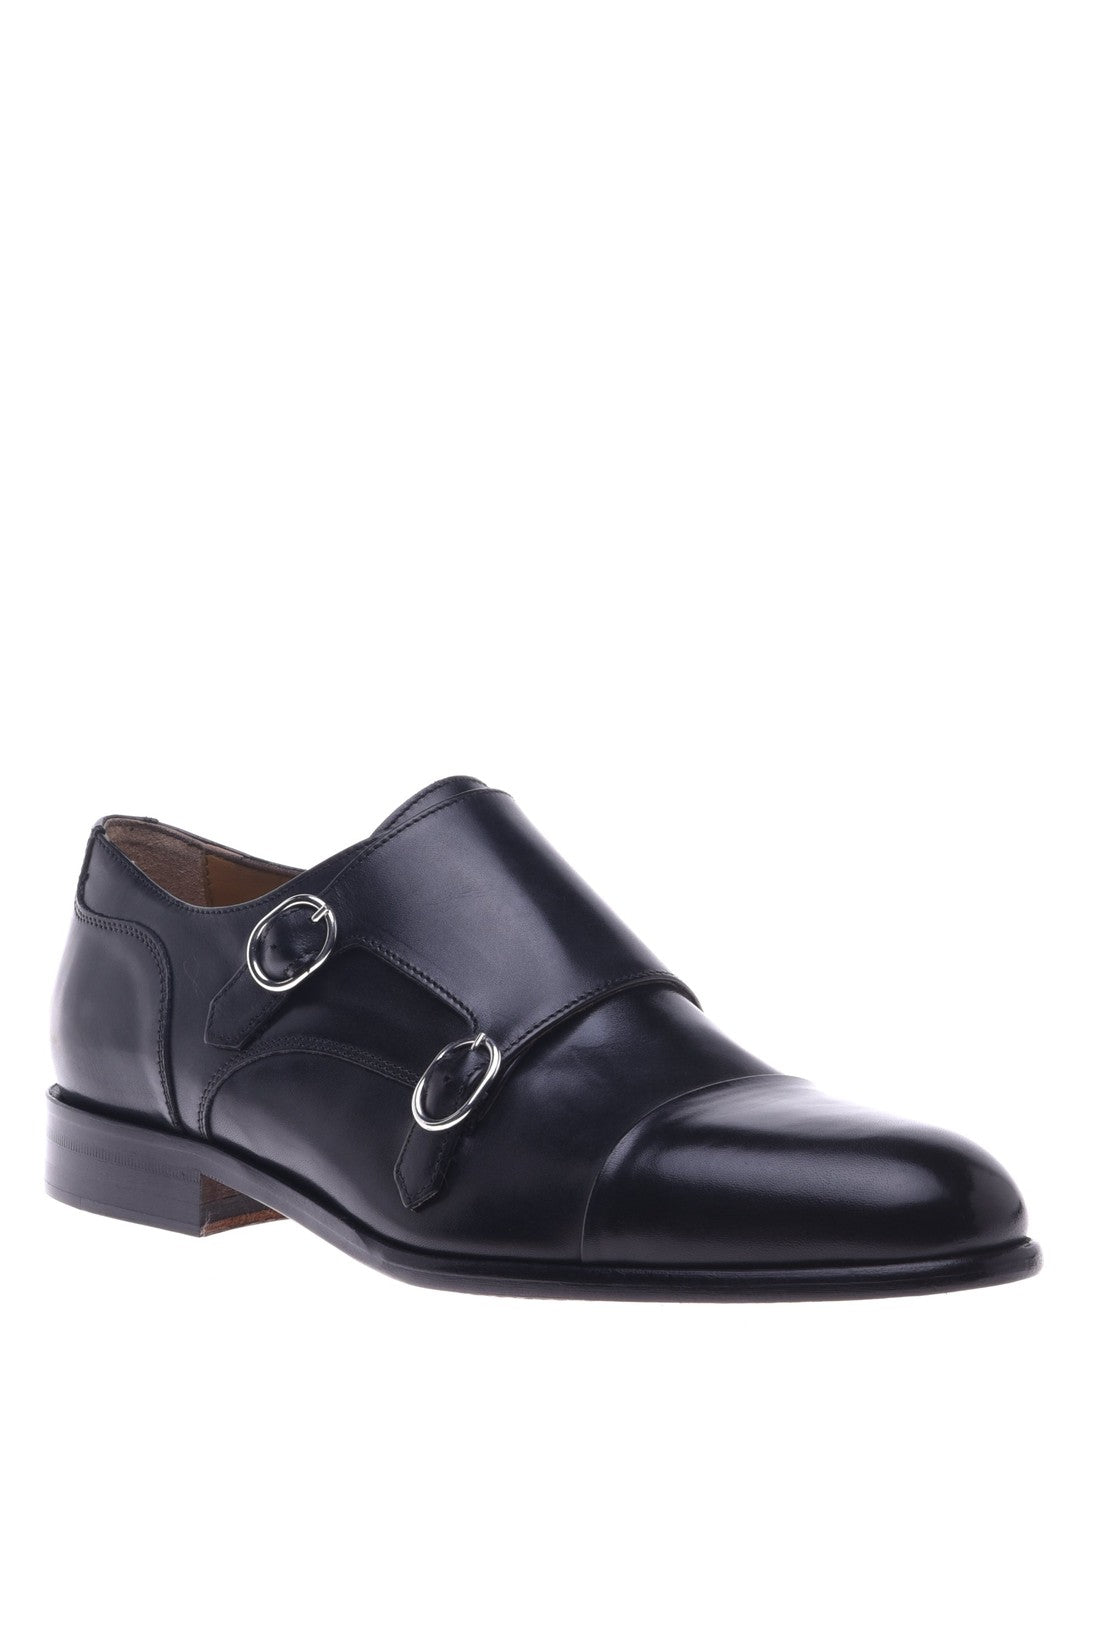 Black calfskin lace-up with double buckle